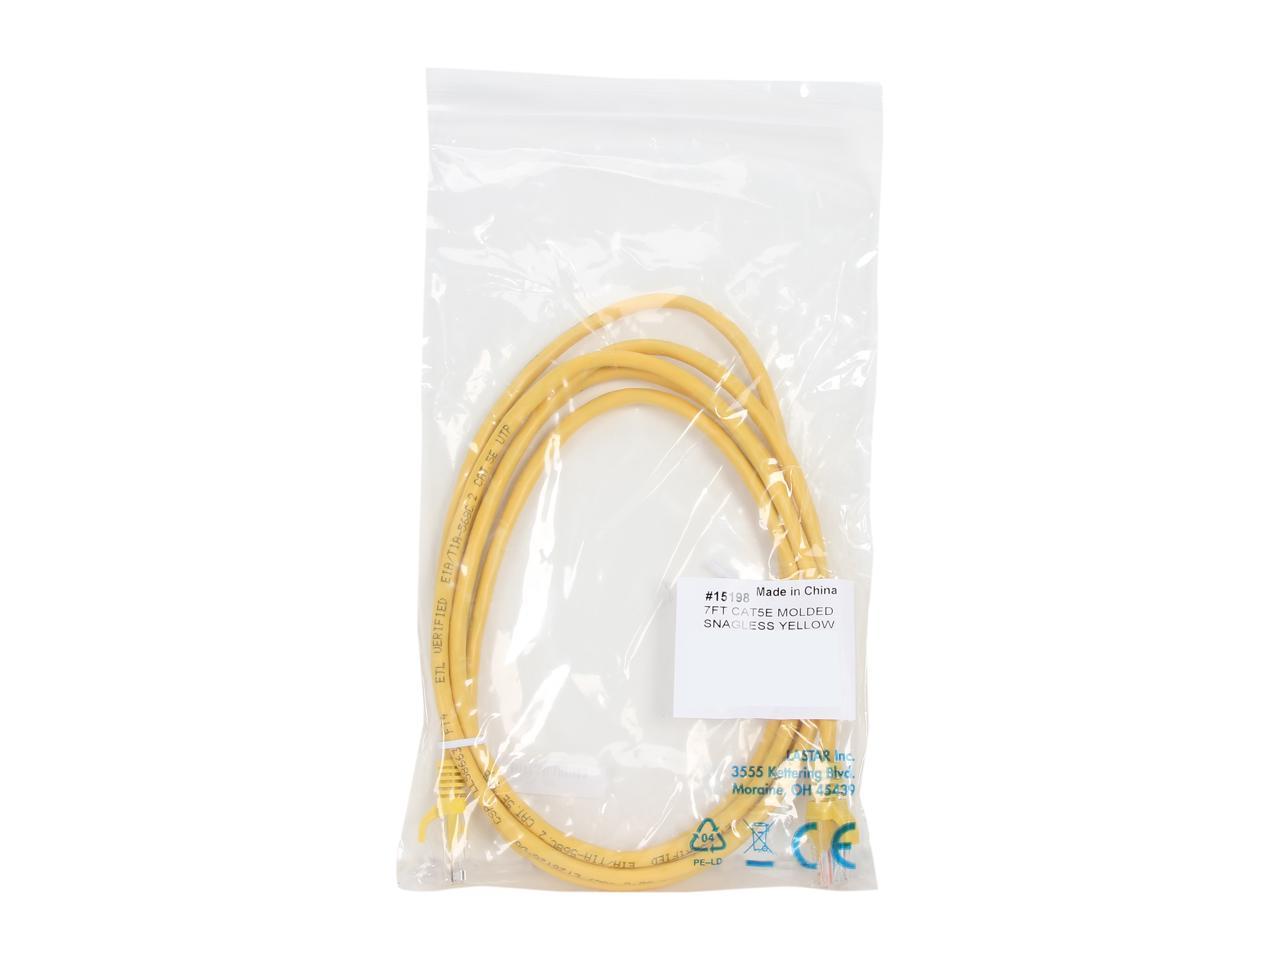 C2G 15198 Cat5e Cable - Snagless Unshielded Ethernet Network Patch Cable, Yellow (7 Feet, 2.13 Meters)